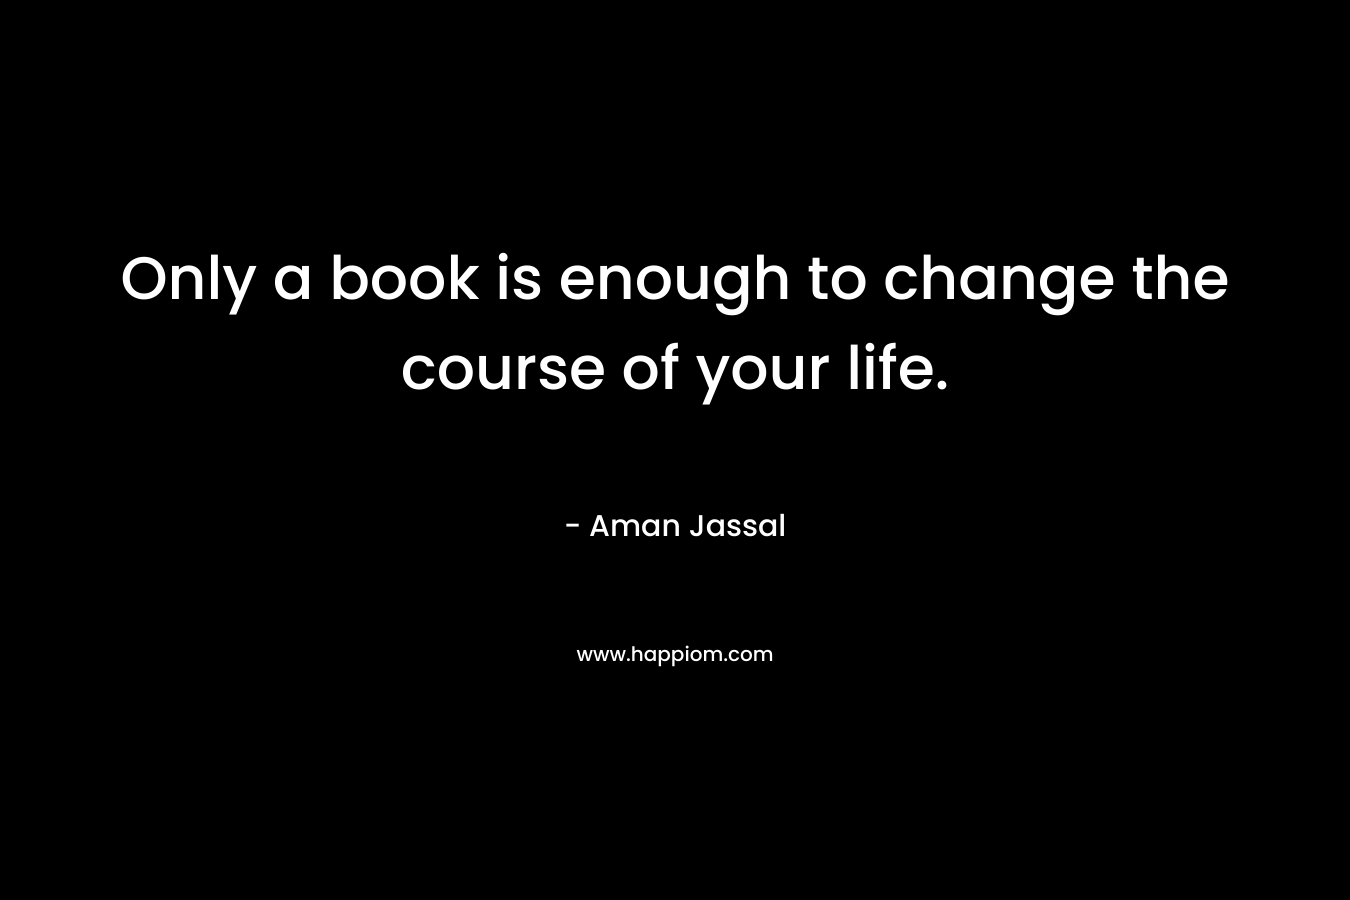 Only a book is enough to change the course of your life.